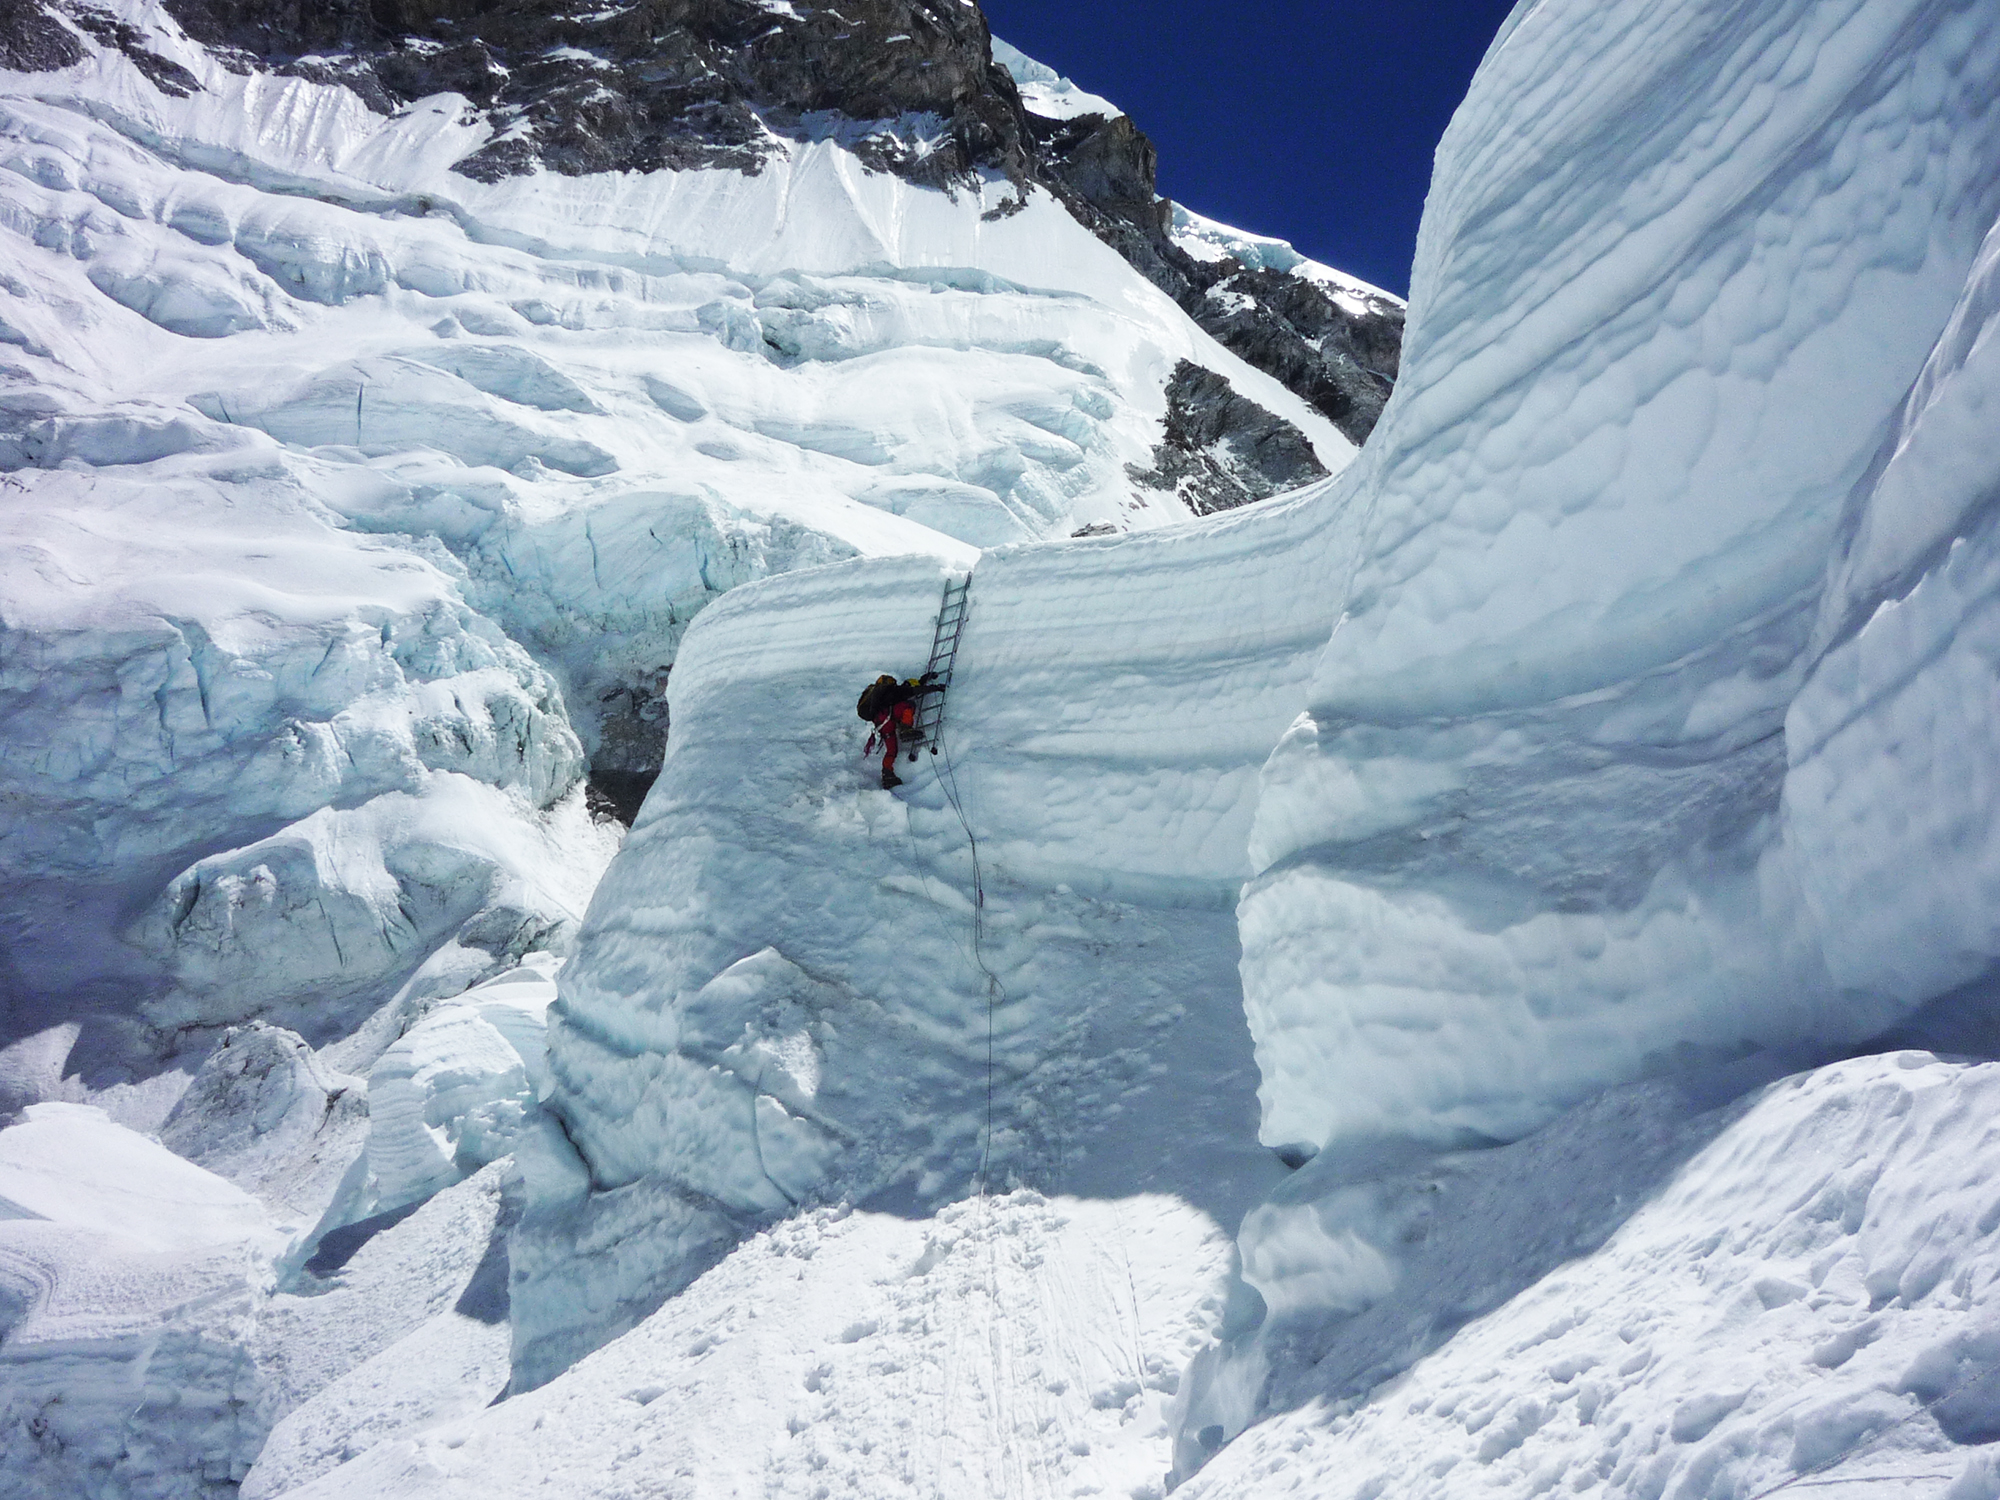 ormer graduate researcher Gabriel Willmann climbs to the top of the Khumbu Icefall in 2008.